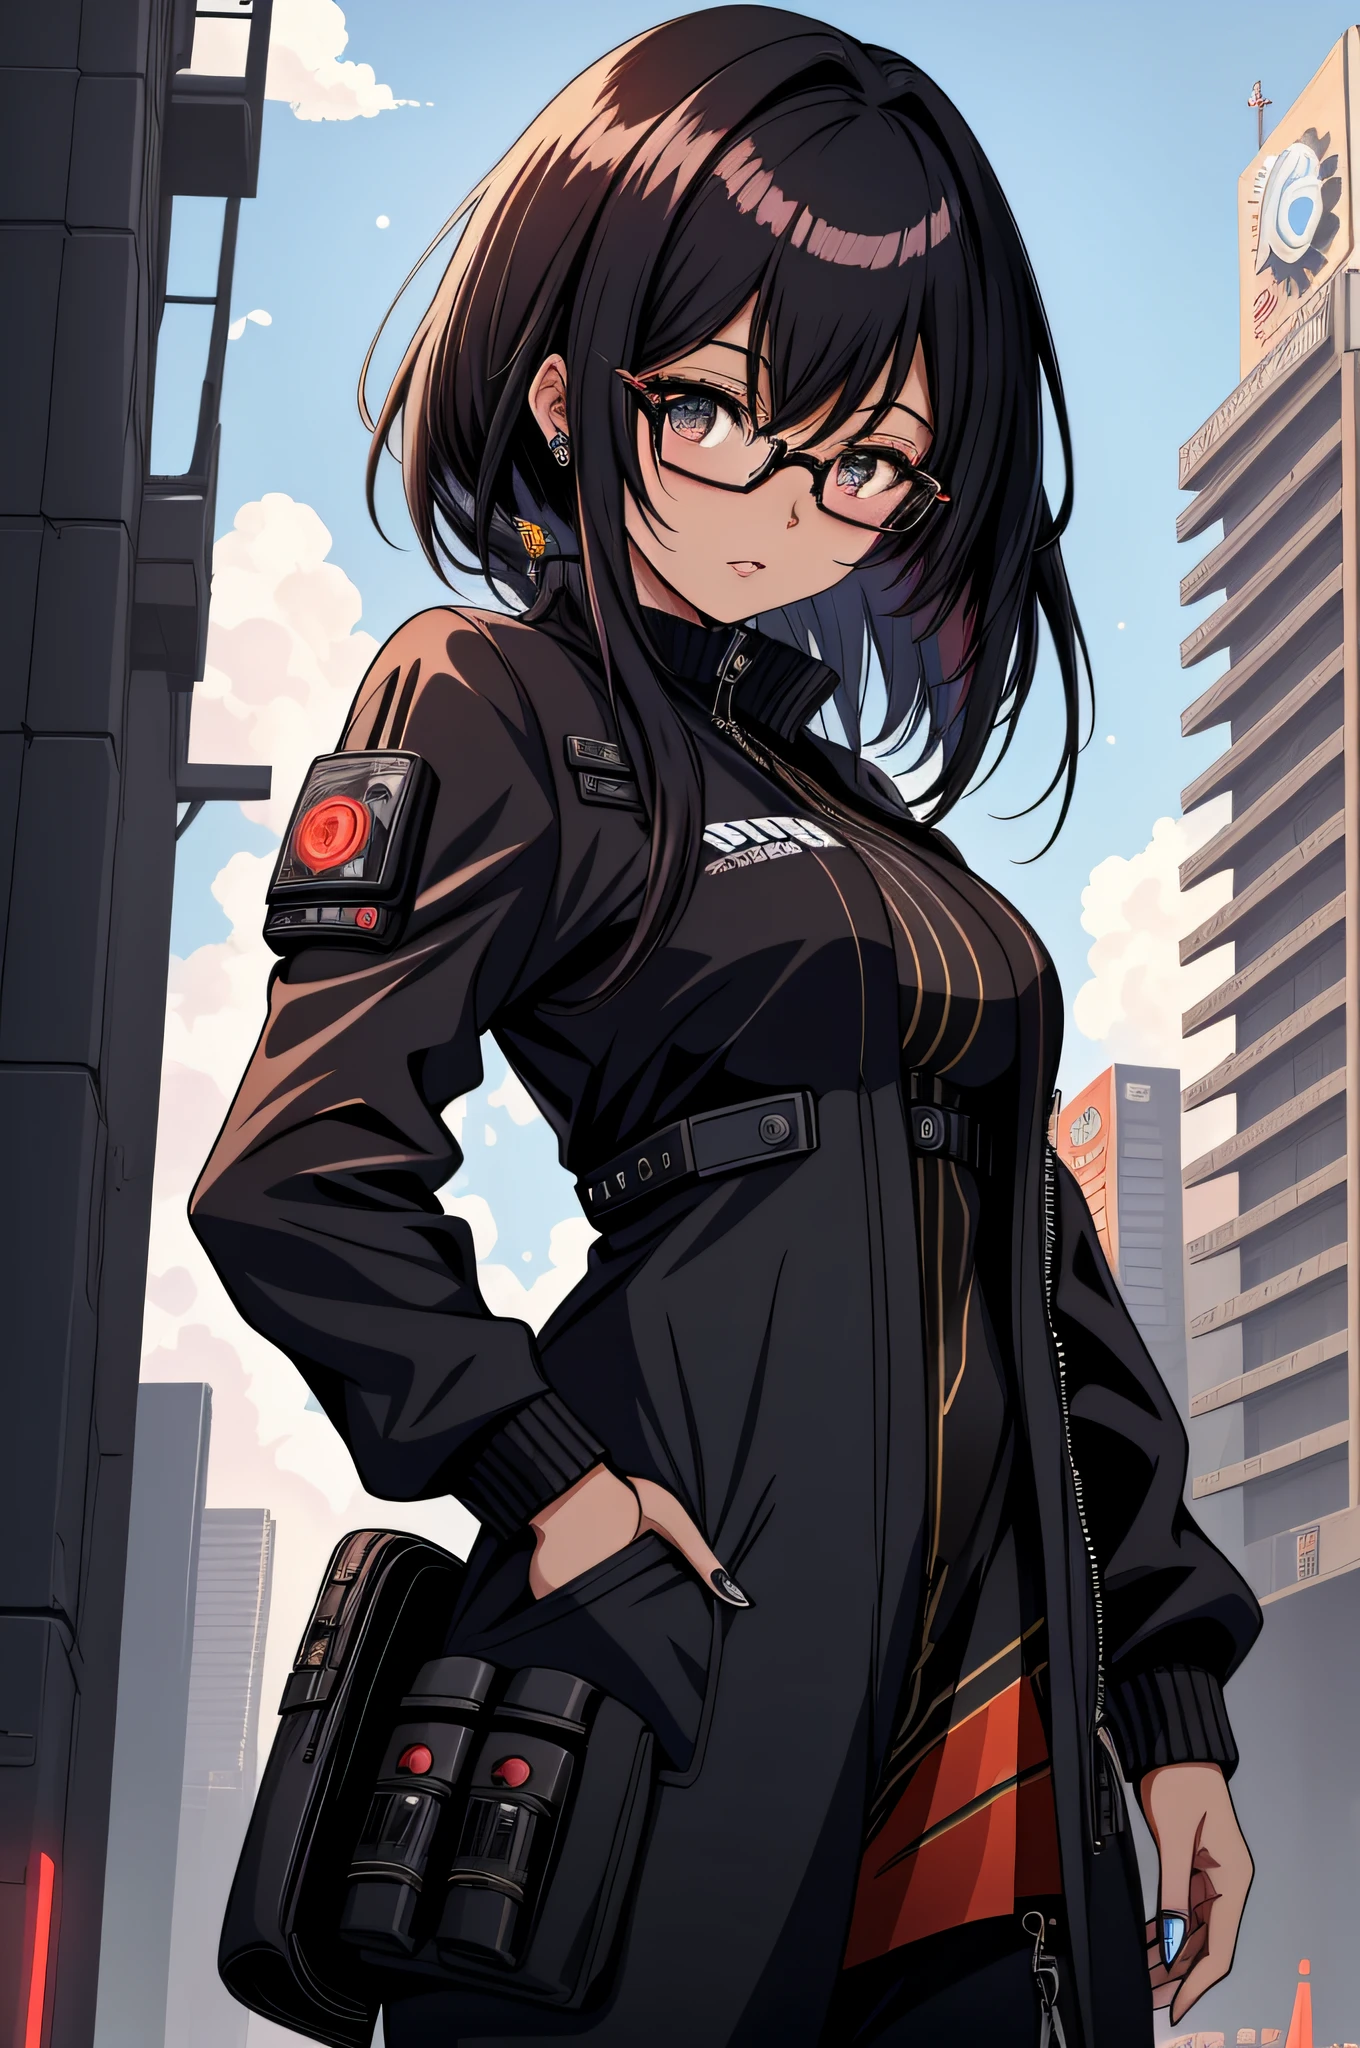 Anime - imagem de estilo 1mulher com olhos azuis e Bblack hair, Bblack hair, thick eyebrow, face of a 27 year old woman, 27 year old young man, cloused mouth, fully body, cyberpunk anime art, tom de pele branca, (cloused mouth: 1.5), hand on hip, (double eyelid), (Bblack hair: 1.3), (shorth hair: 1.3), wearing dress, digital cyberpunk anime art, cyberpunk anime art, range murata and artgerm, eyeglass, futuristic clothing, hand on hip, (whole body: 1.7), wearing dress, stylish pants, Technological dress, transparent spectacle lenses, 极其详细的Artgerm, modern cyberpunk anime, artgerm and atey ghailan, artgerm and genzoman, cloused mouth